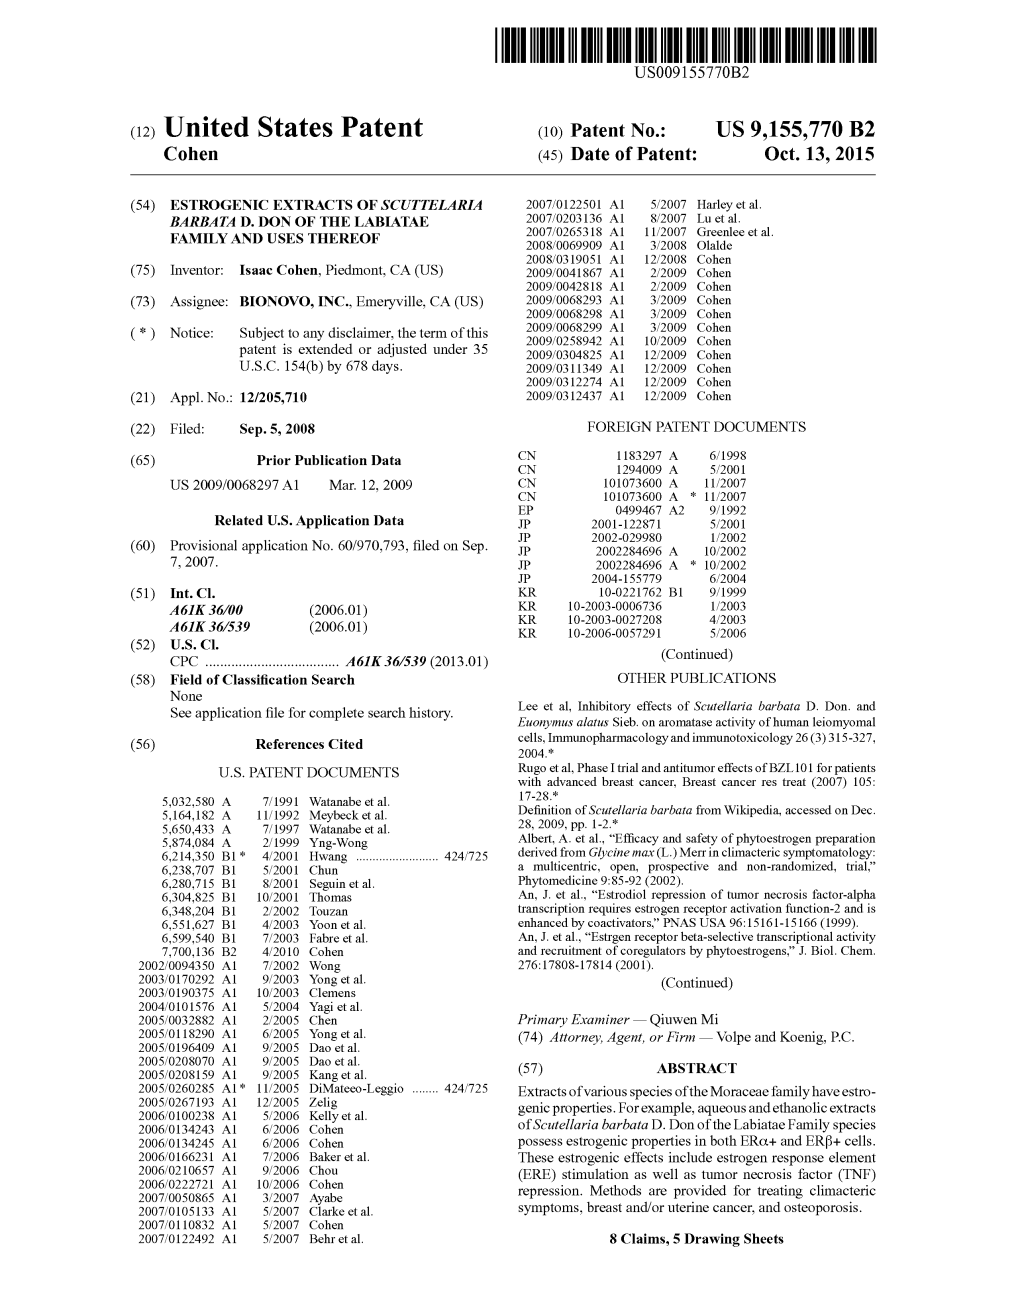 (12) United States Patent (10) Patent No.: US 9,155,770 B2 Cohen (45) Date of Patent: Oct